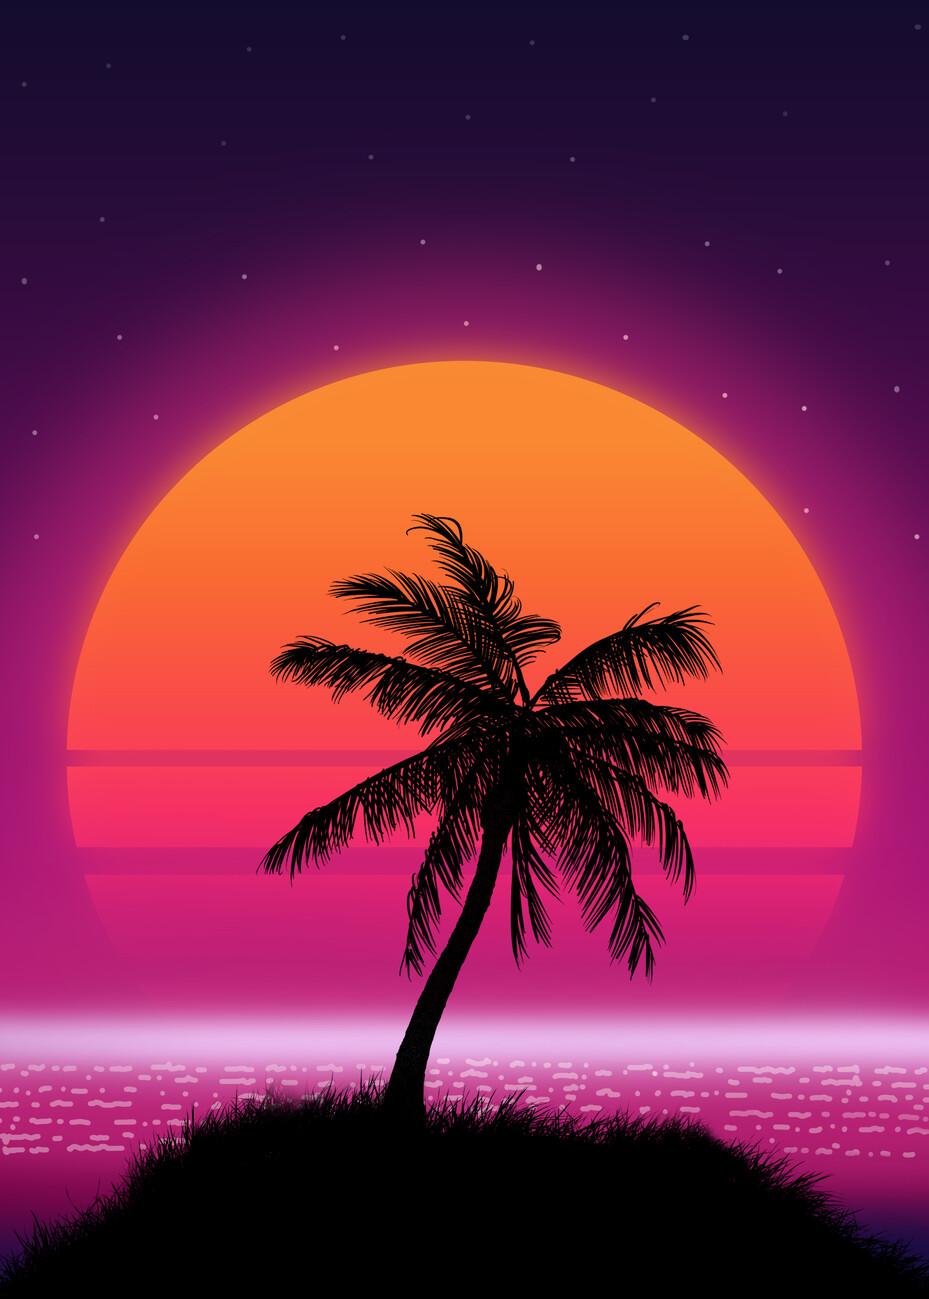 Palm Sunset 80s Wall Mural Buy online at Europosters